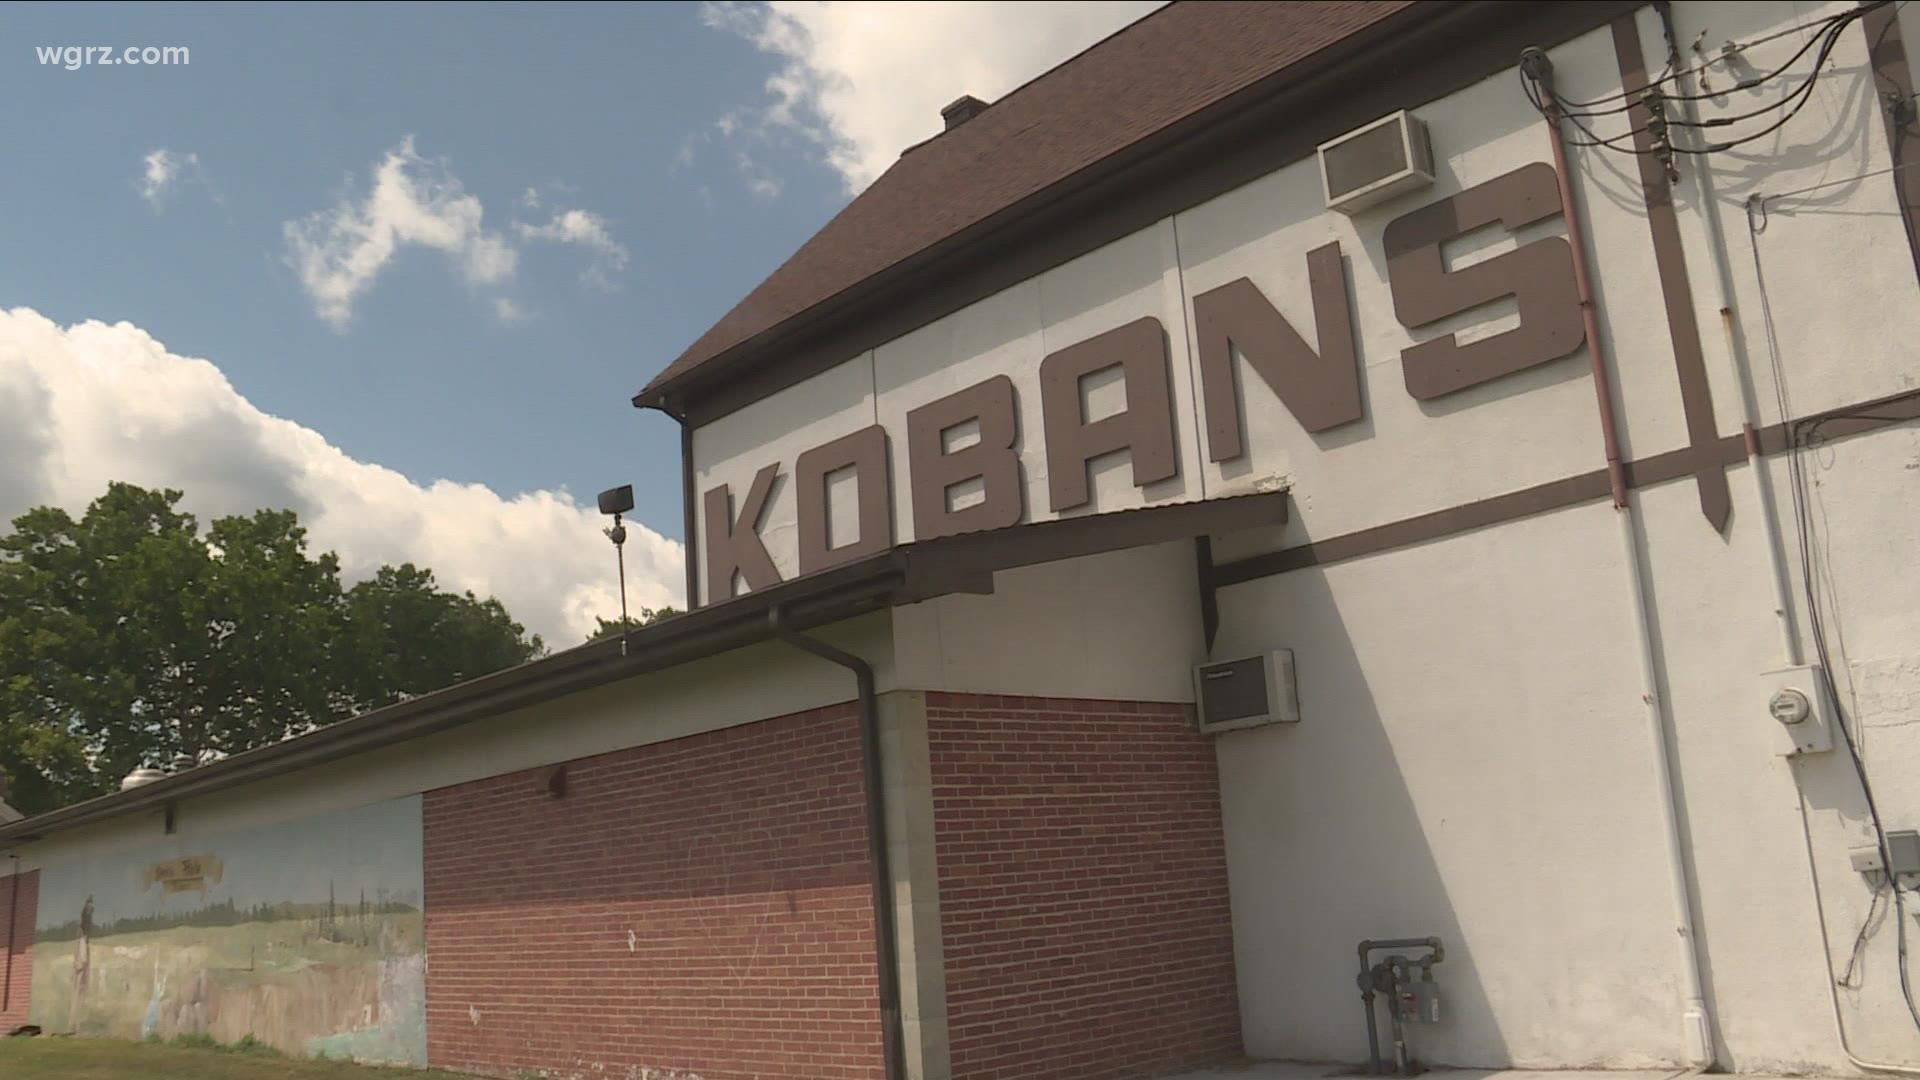 After more than four decades in business.. a polish-american staple is closing Koban's